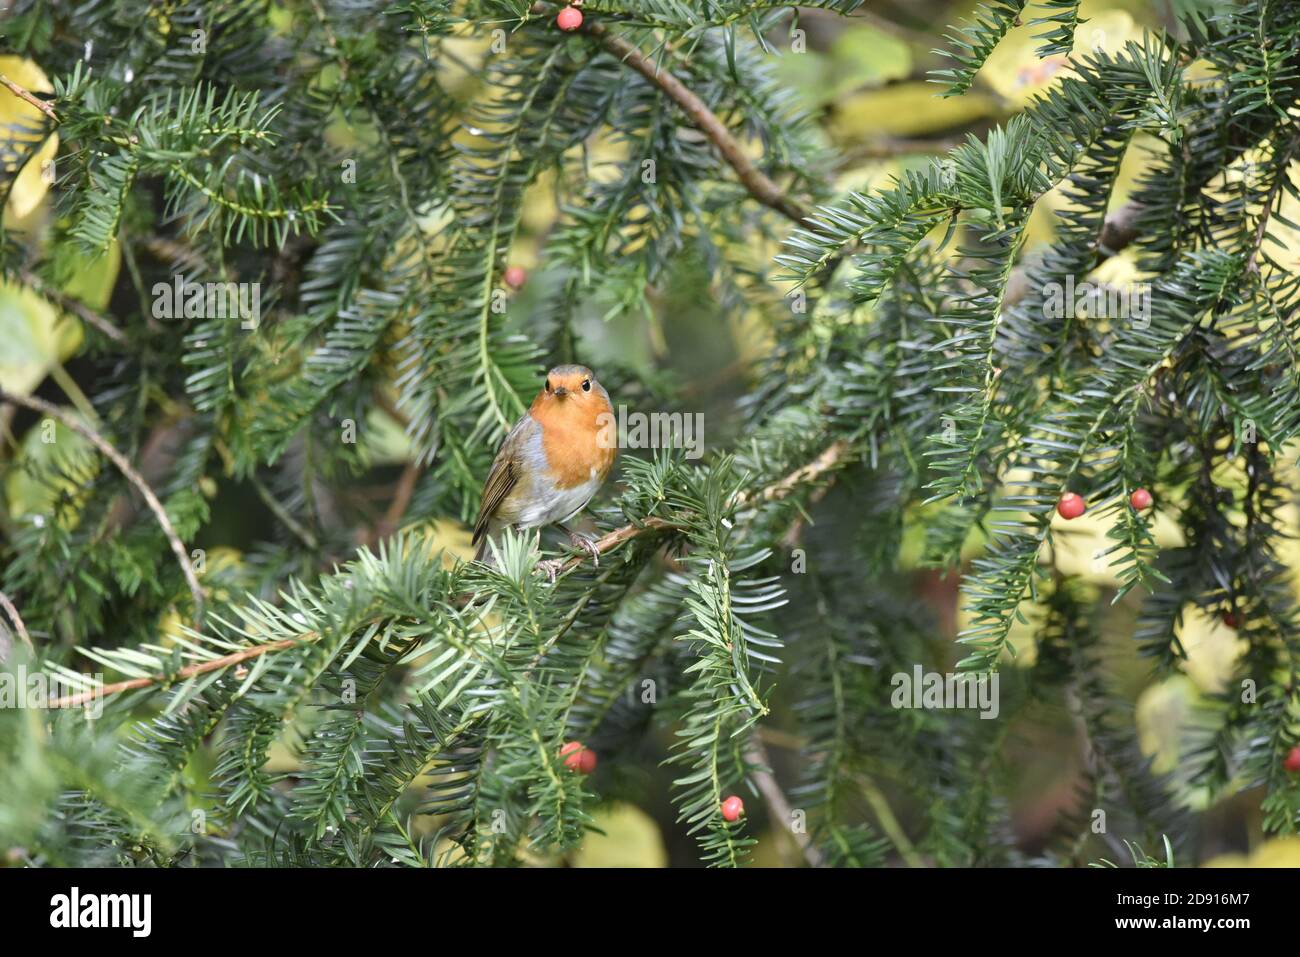 European Robin, Erithacus rubecula, in Spruce Tree Among Berries, Facing Camera on a Sunny Autumn Day in England Stock Photo